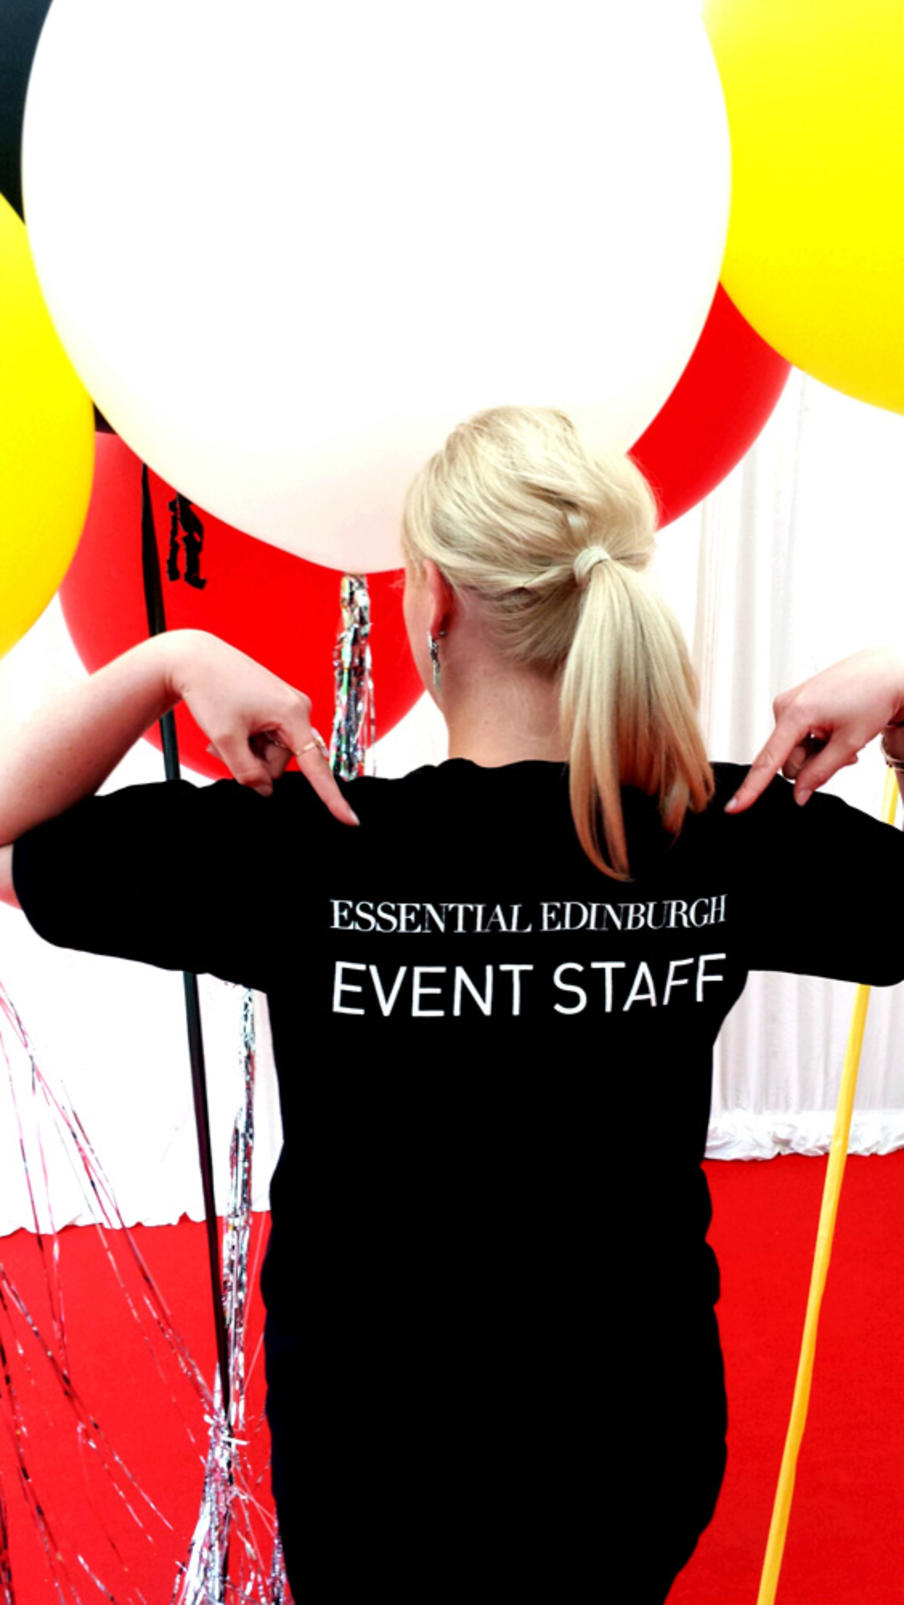 Personalised printed event t-shirt. Your logo, your message.